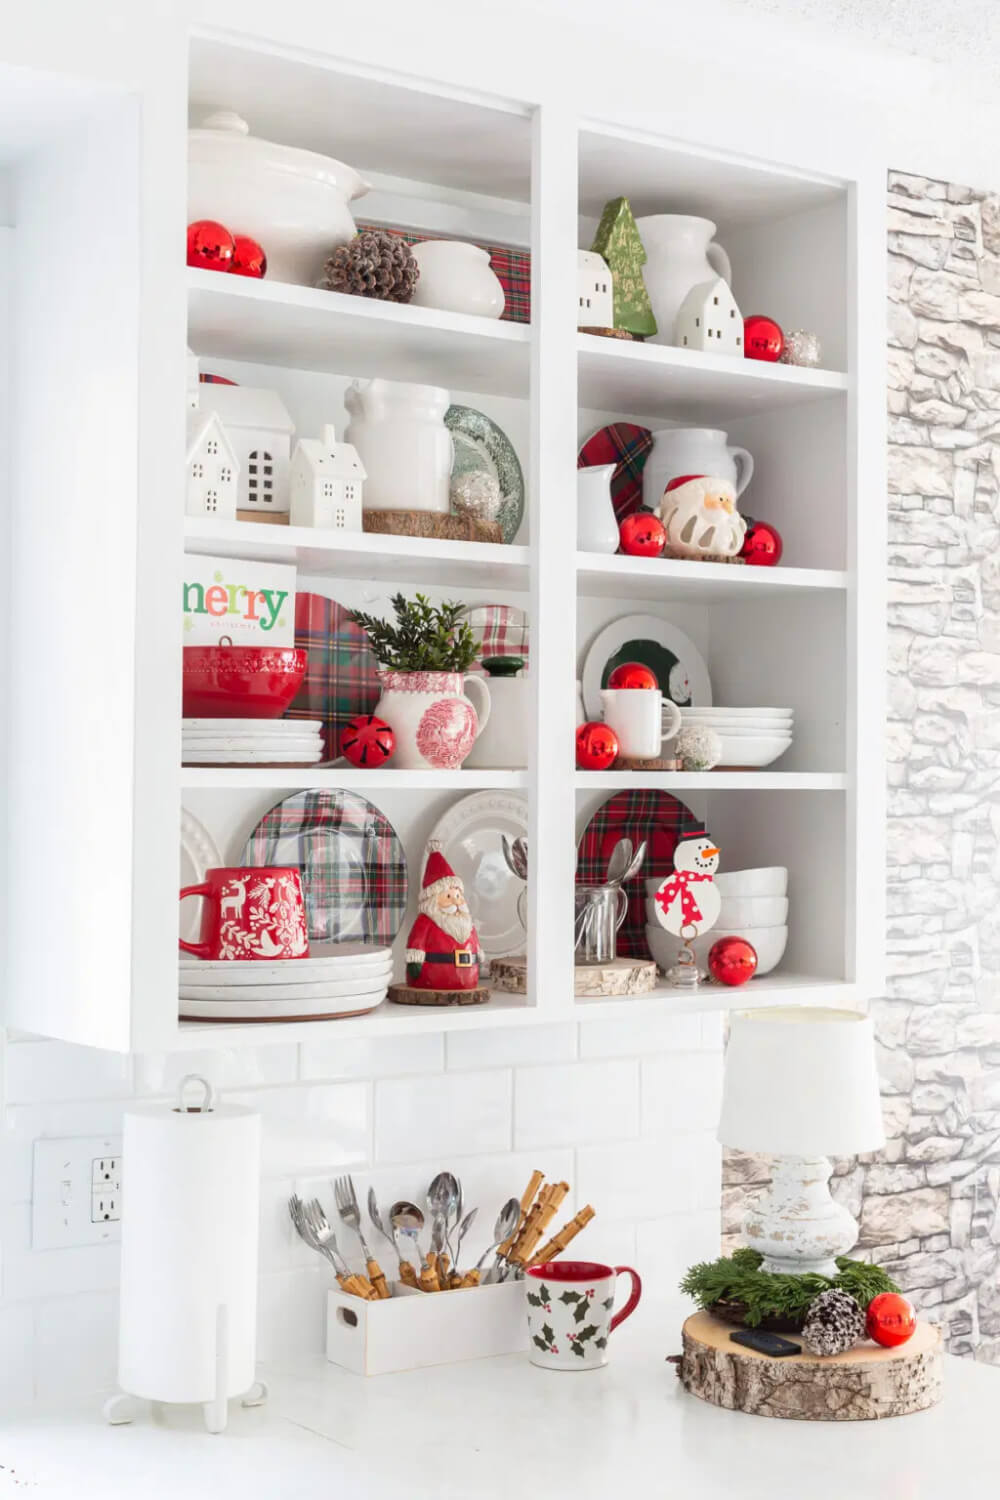 A red and white holiday decorating theme